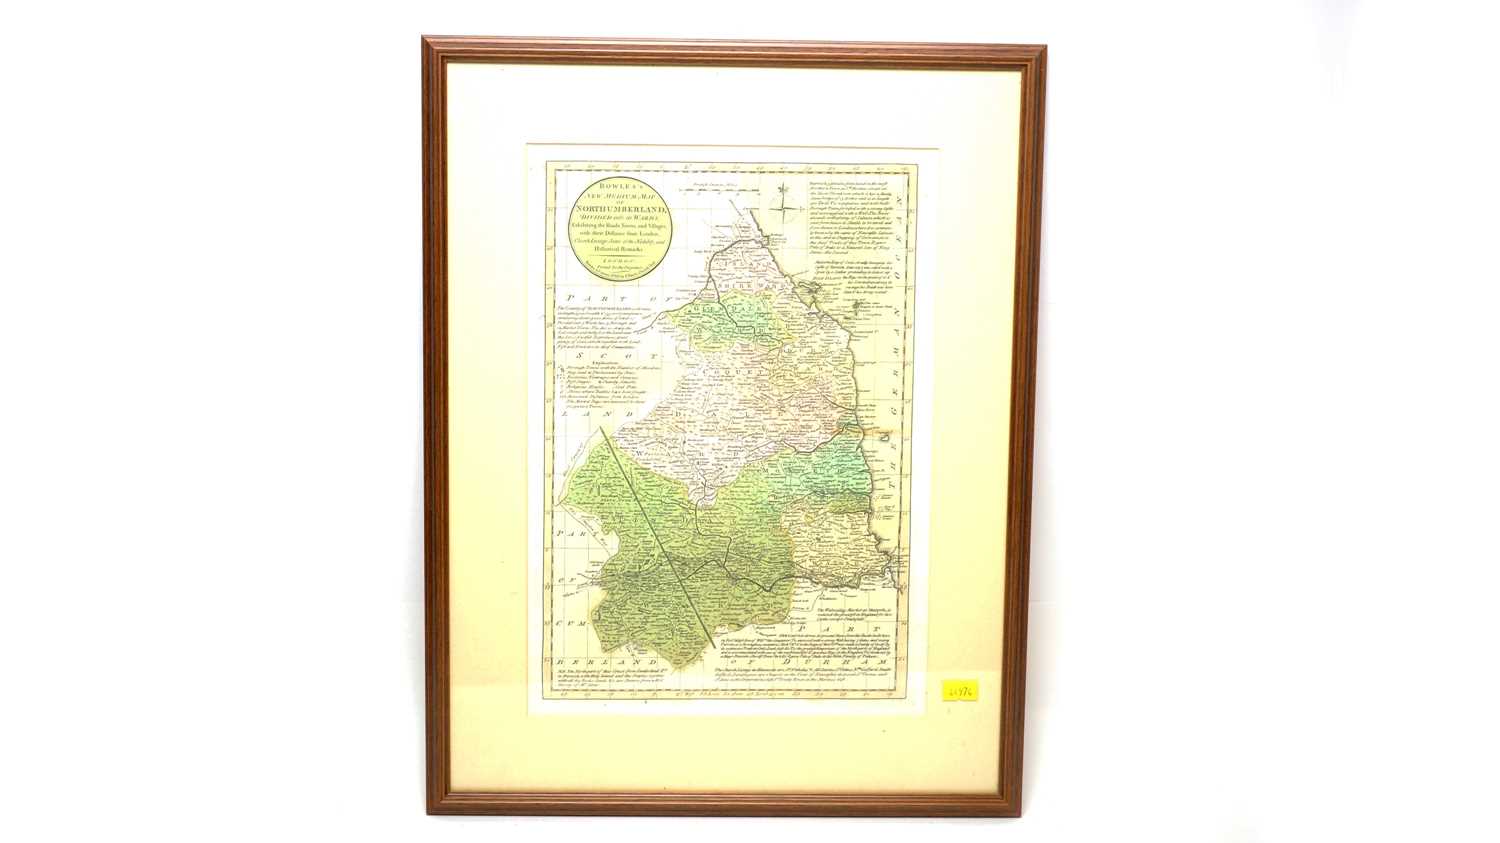 A Bowes's New Medium Map of Northumberland in a frame.